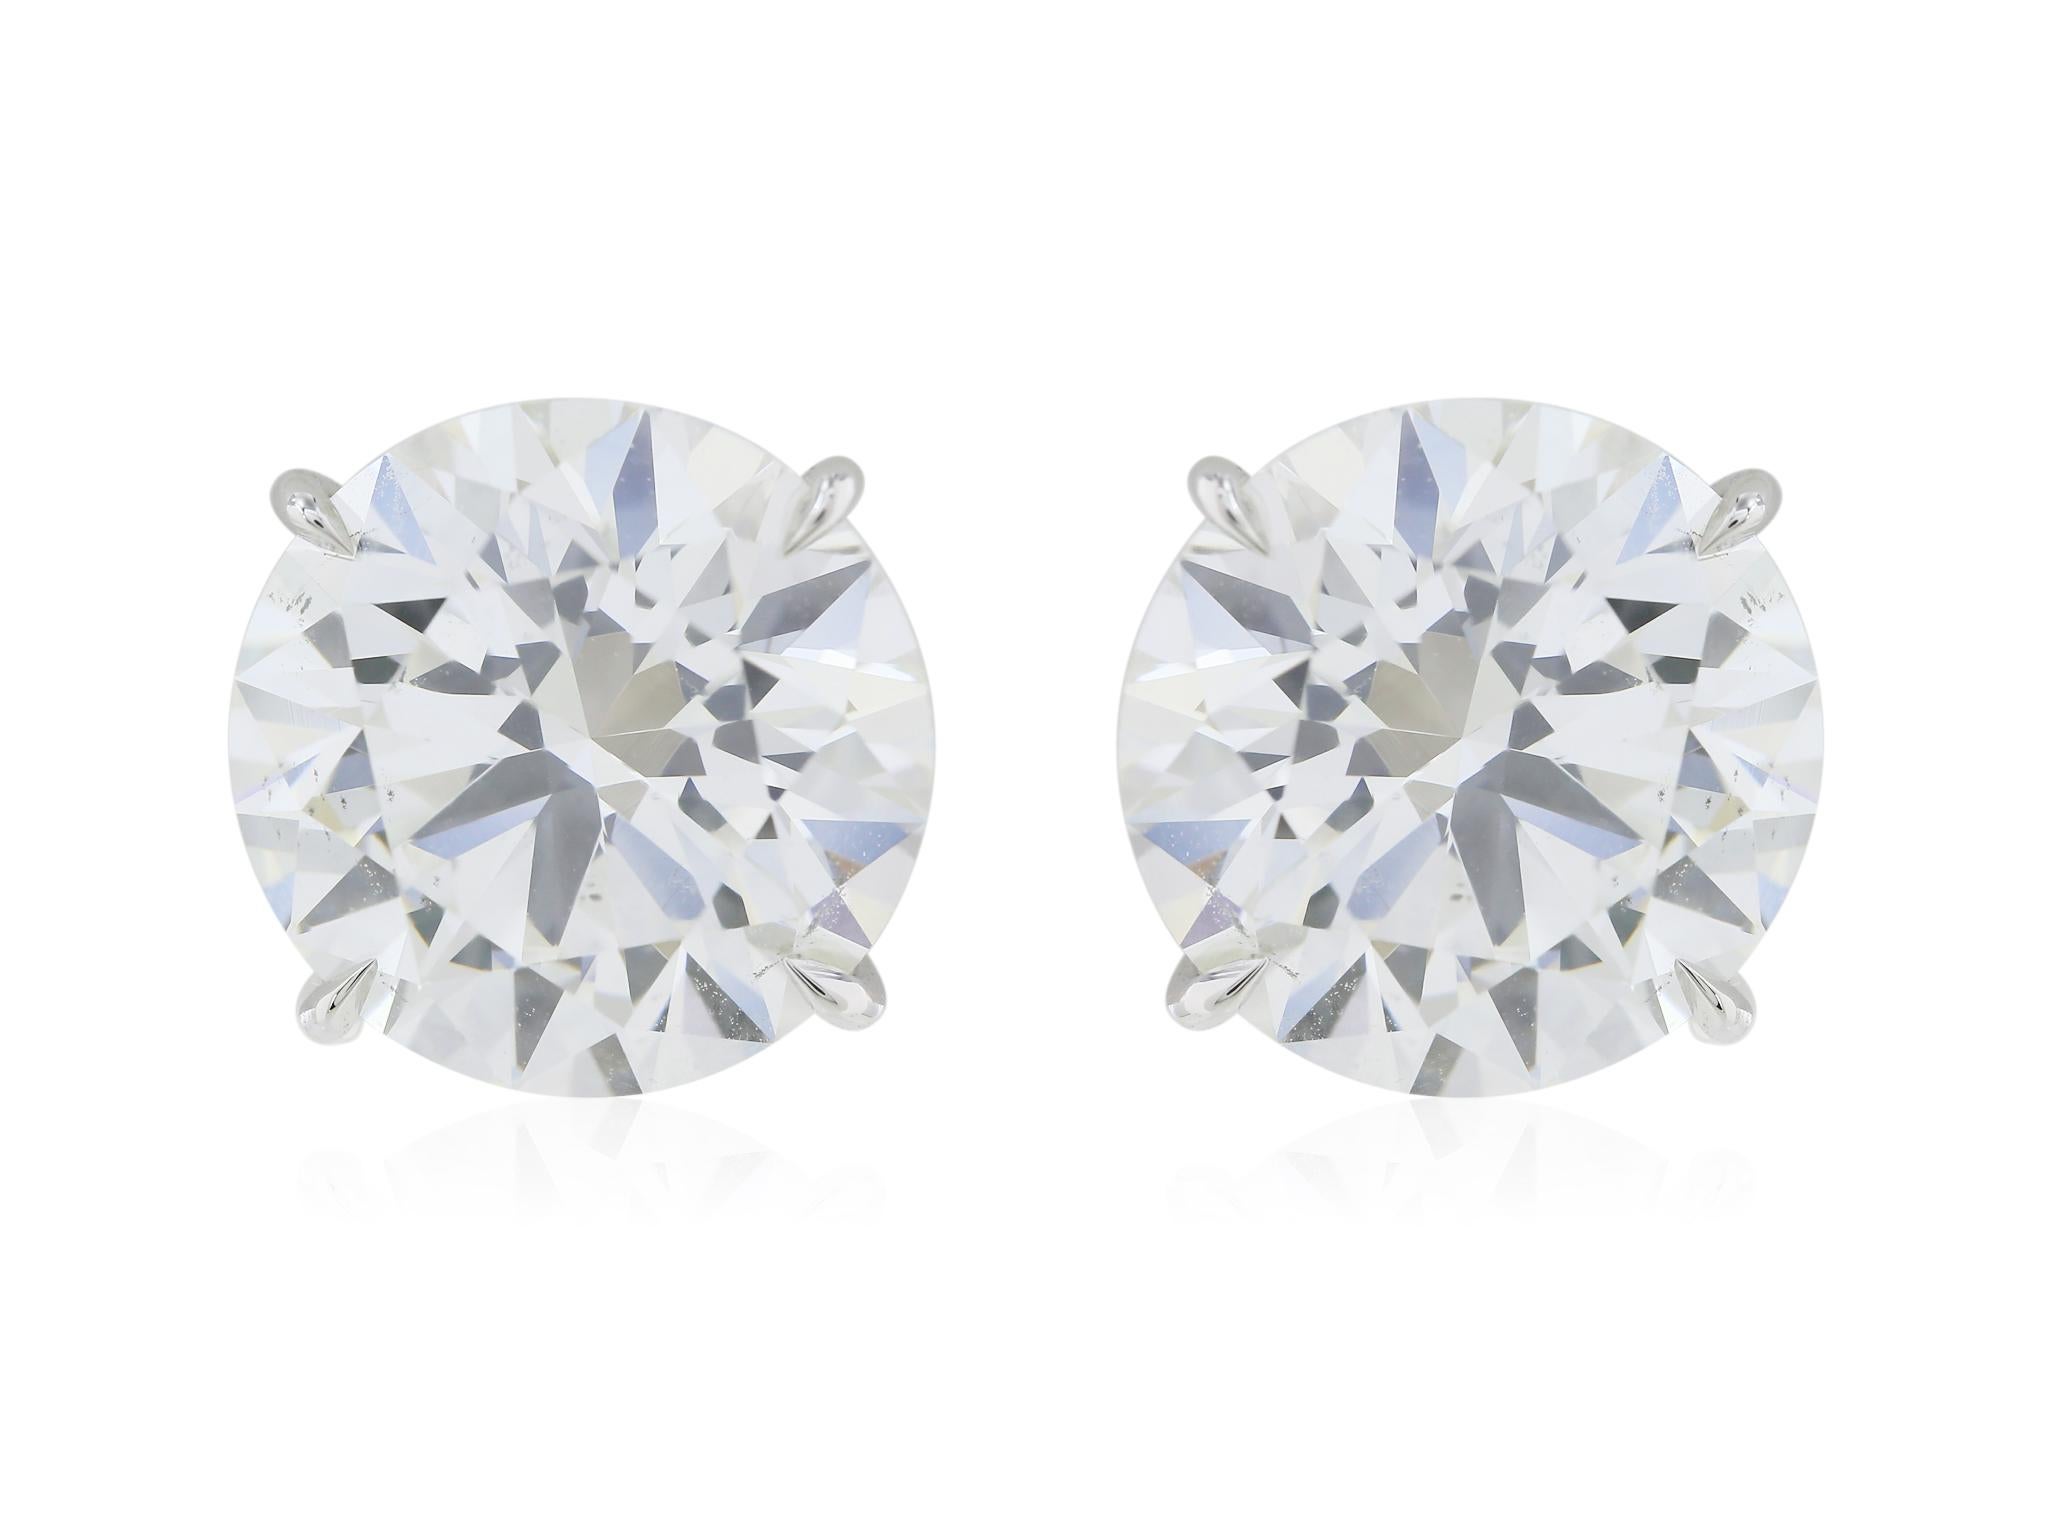 Round Cut GIA Certified 10.04 Carat H/SI2 Diamond Stud Earrings For Sale